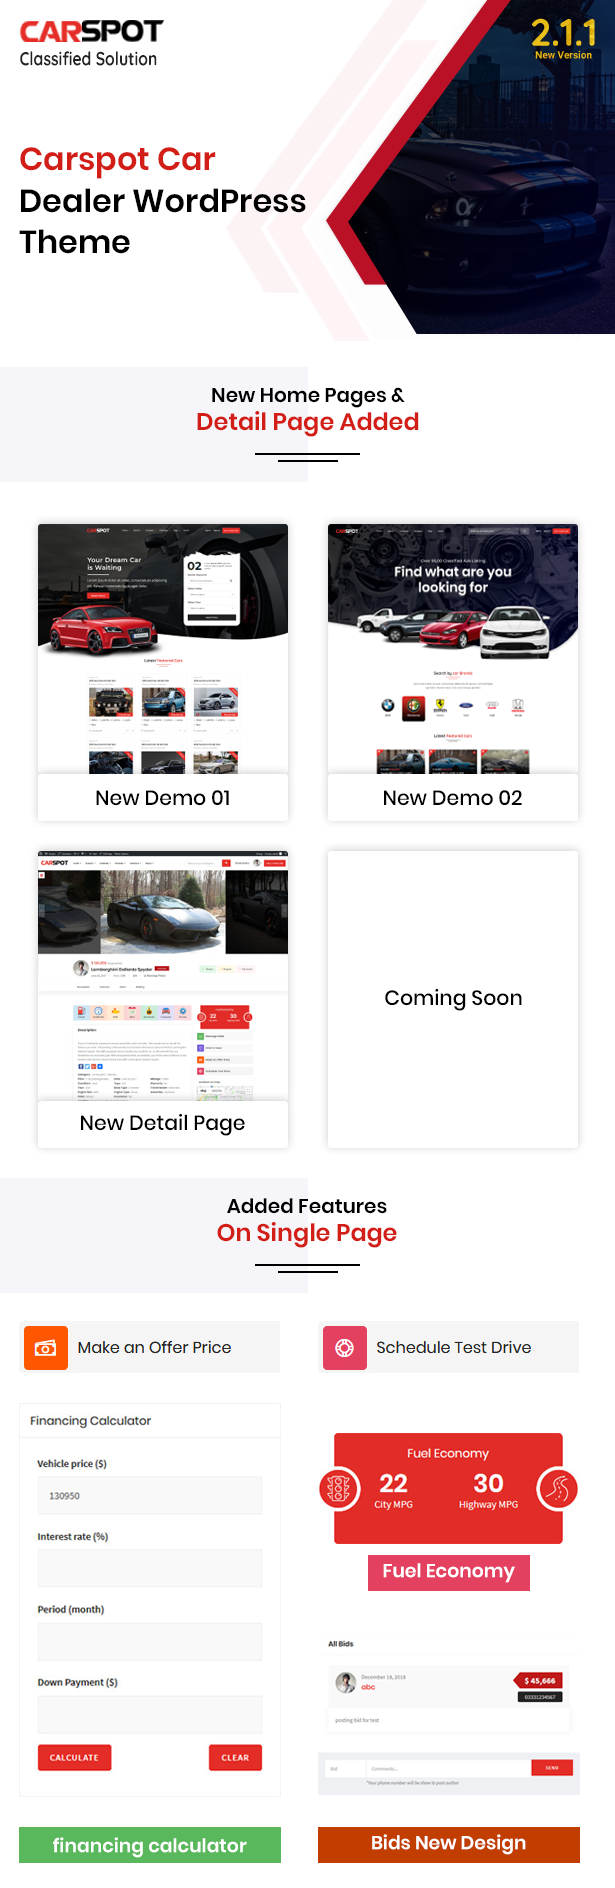 carspot new home pages